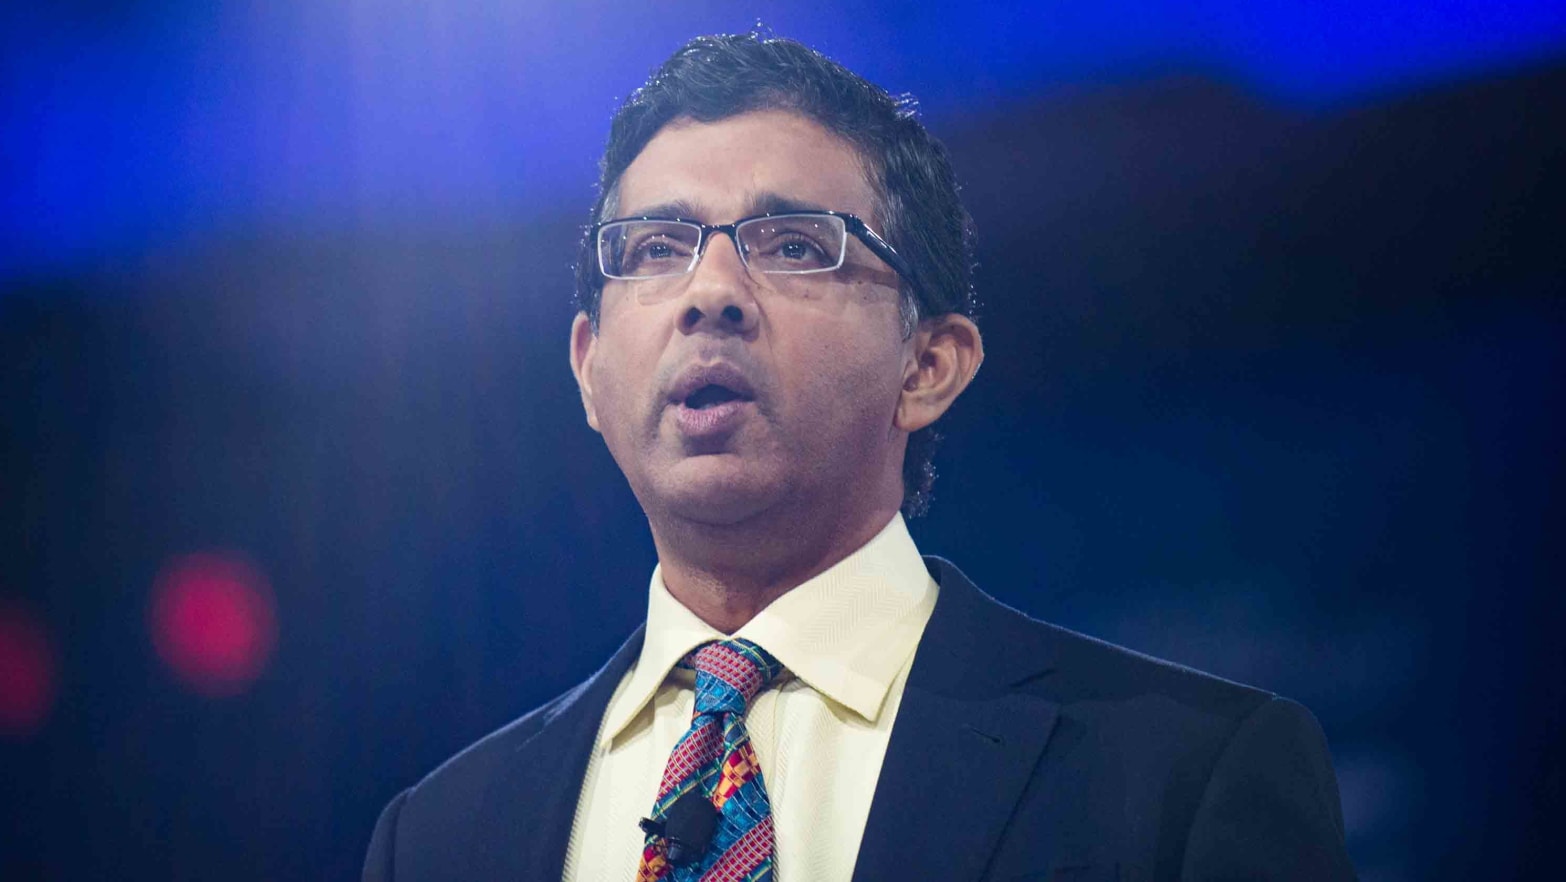 Dinesh D'Souza Biography: Books, Age, Net Worth, Children, Wiki, Height, Spouse